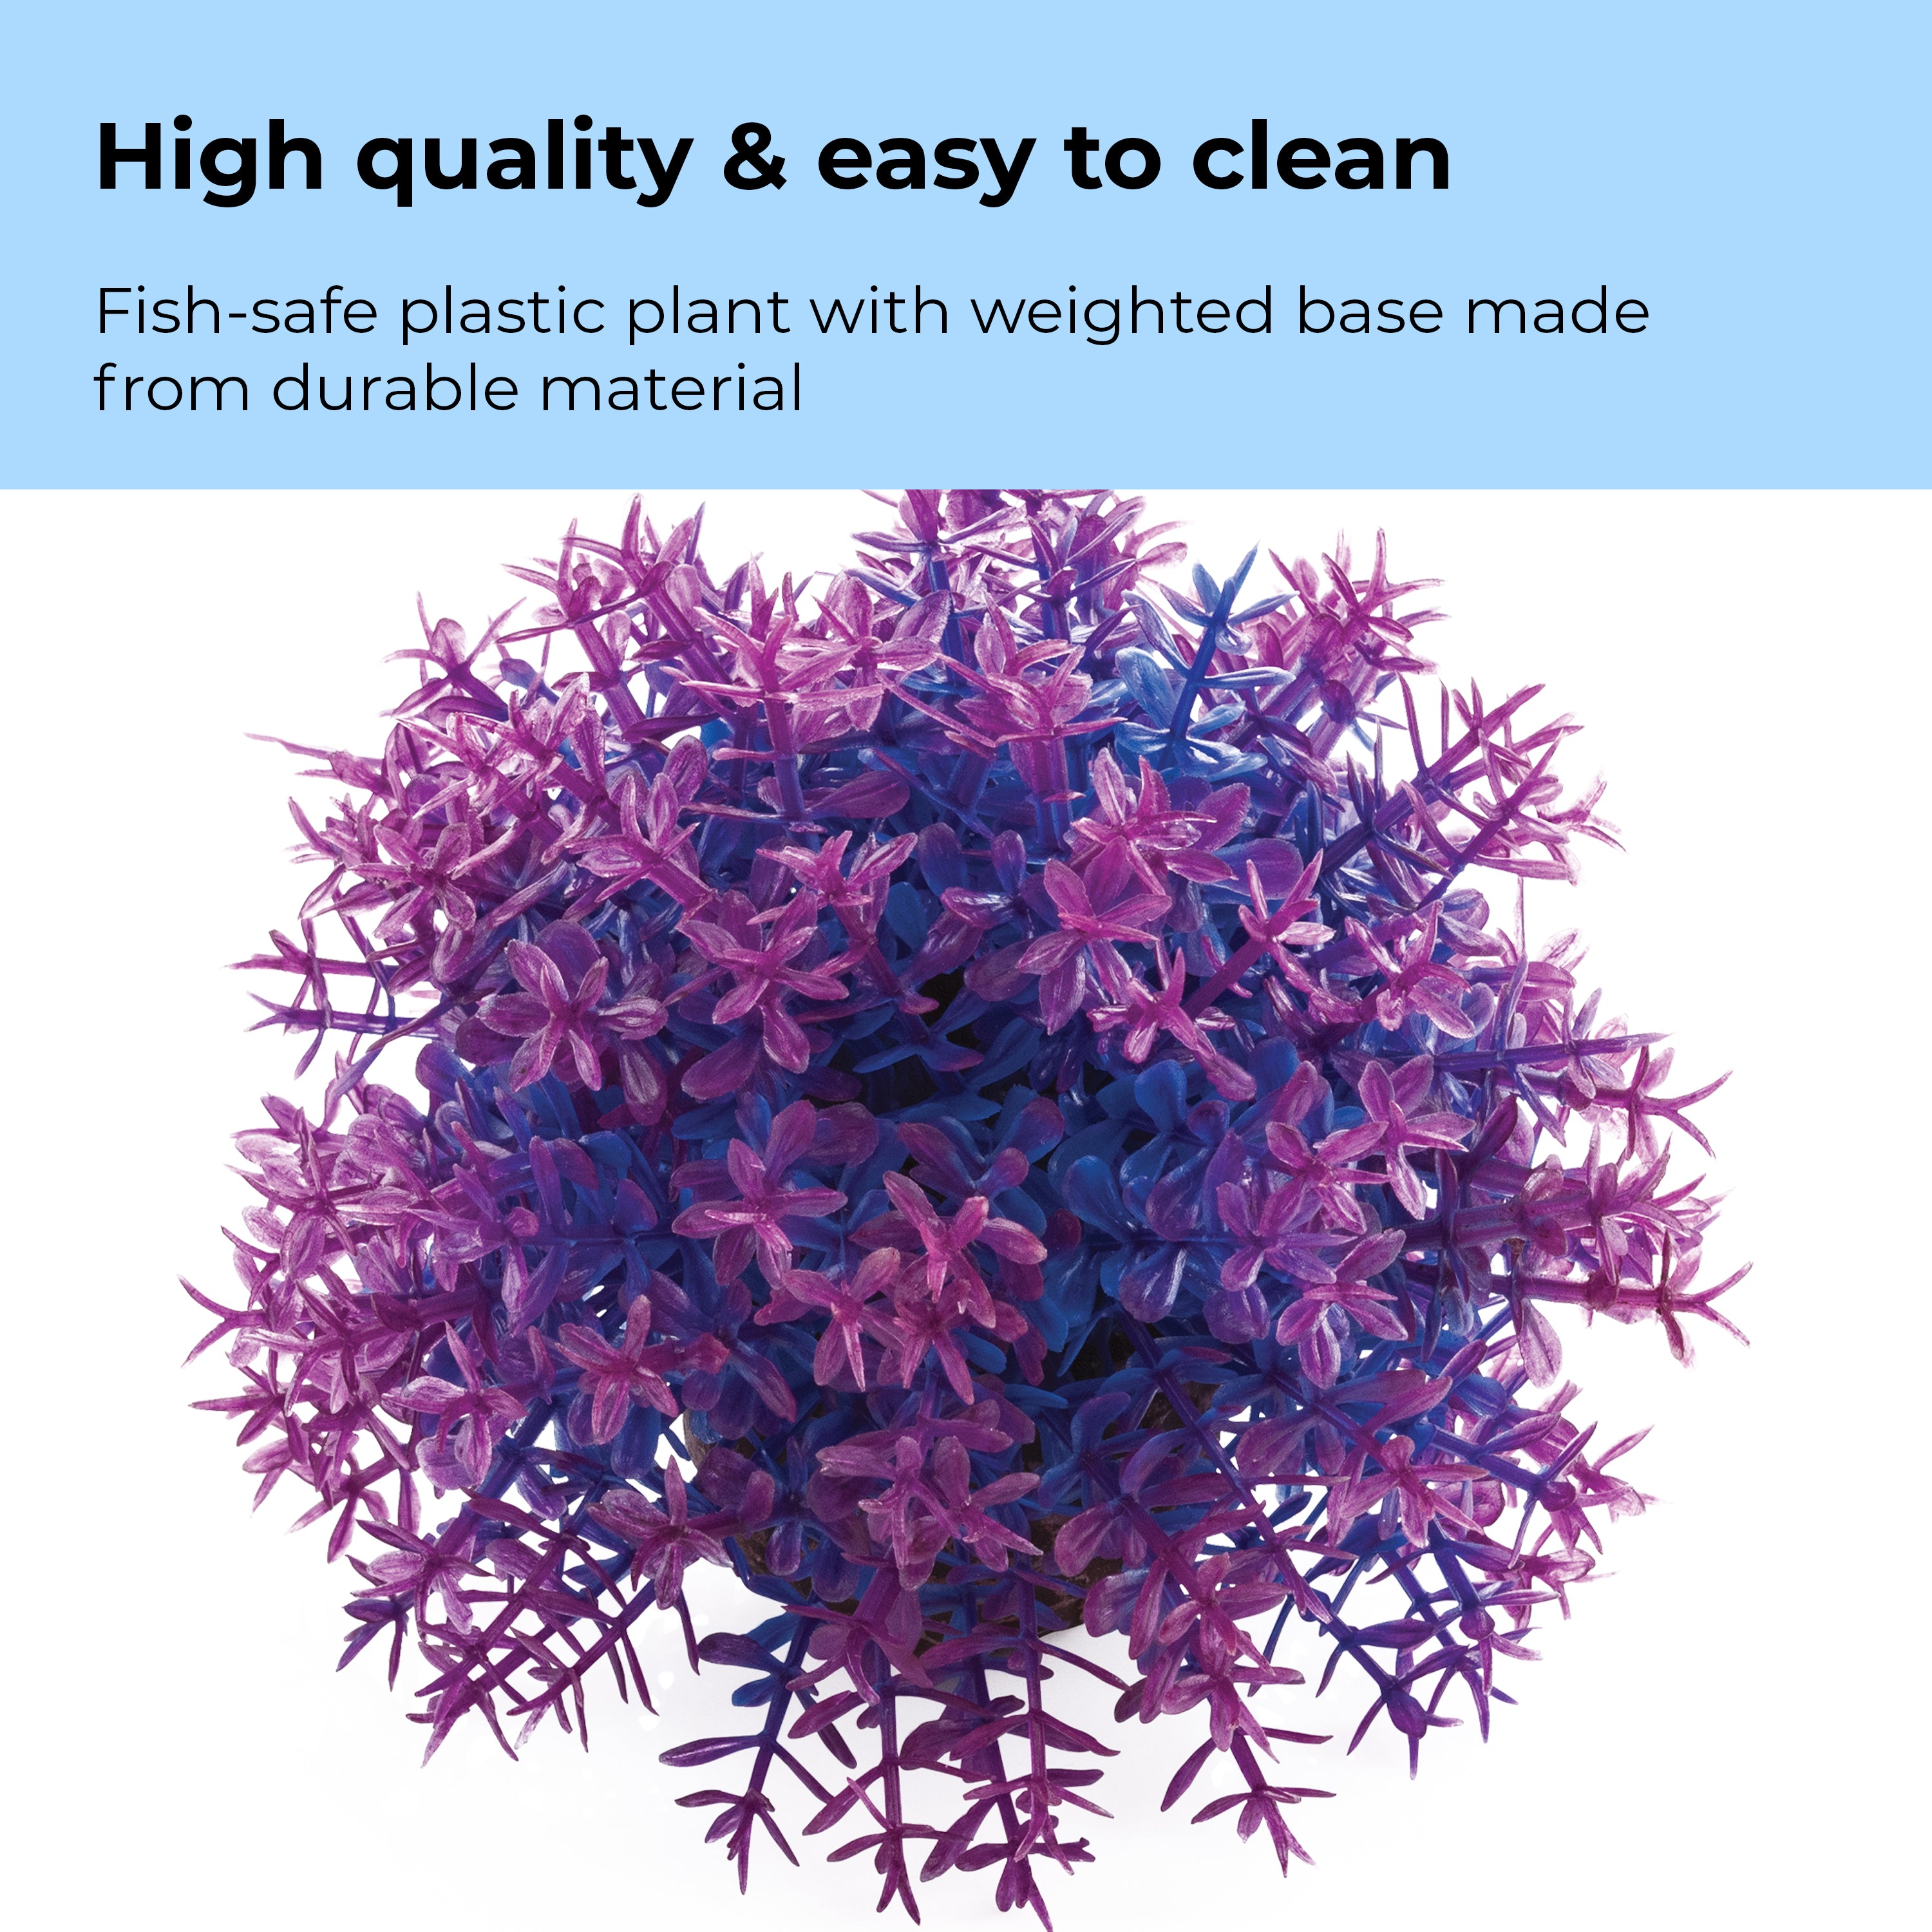 Flower Ball - High quality & easy to clean